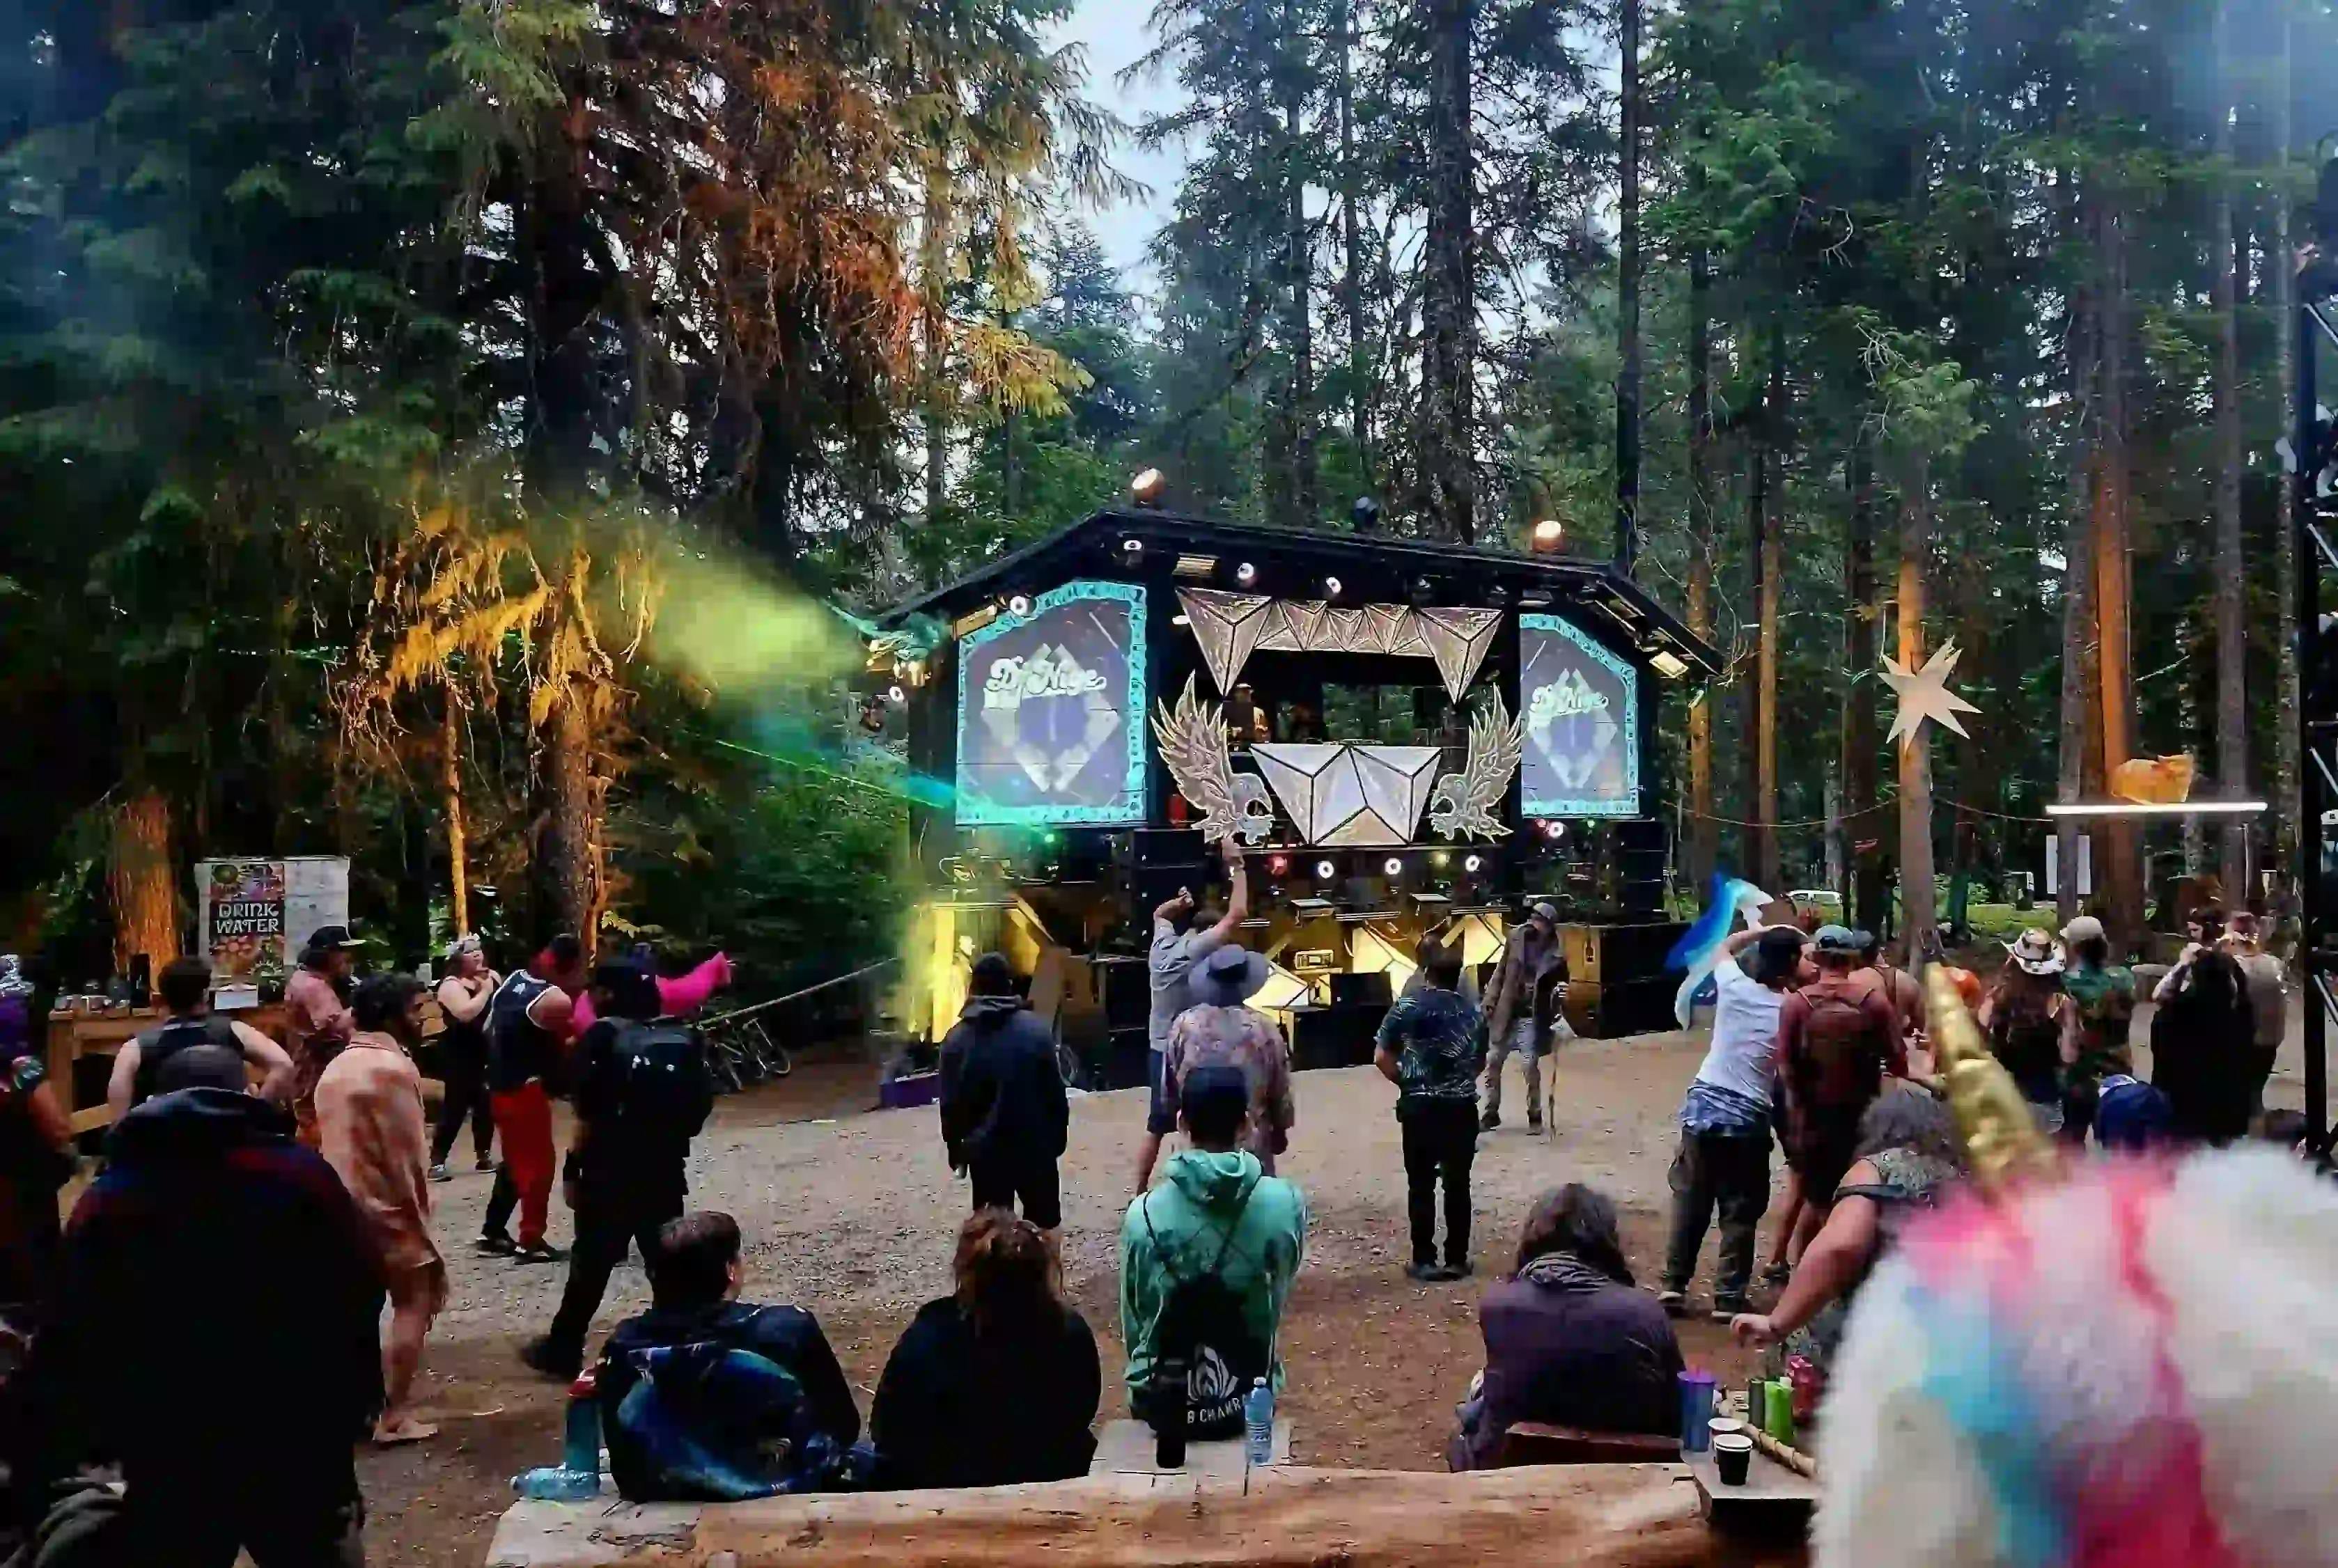 Evening view of a vibrant crowd gathered at the Asgard stage, with festival lights in full effect.